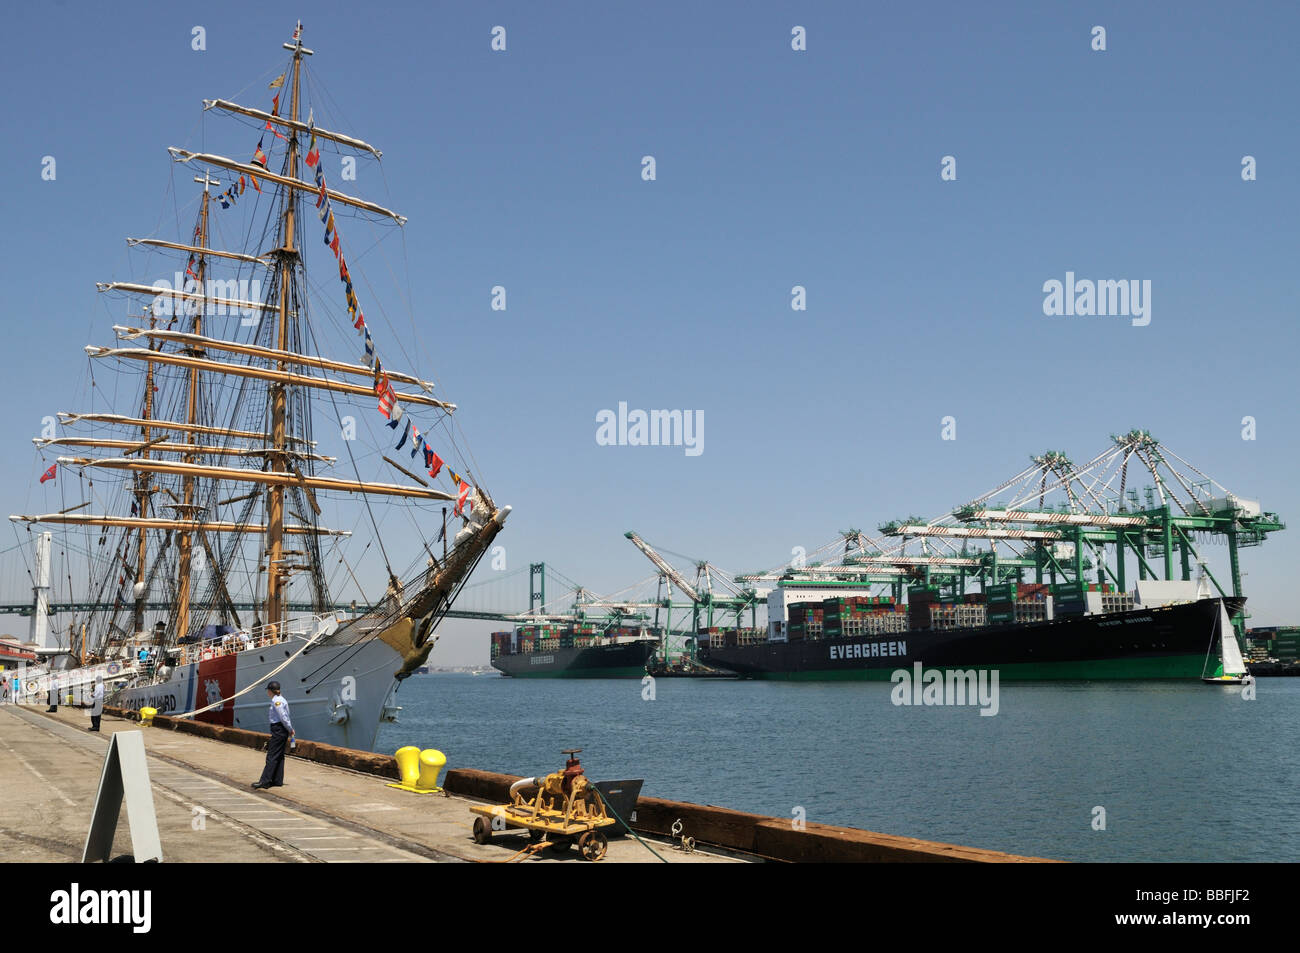 USCG Barque Eagle docked along the main channel of Port of Los Angeles during Festival of Sail Stock Photo